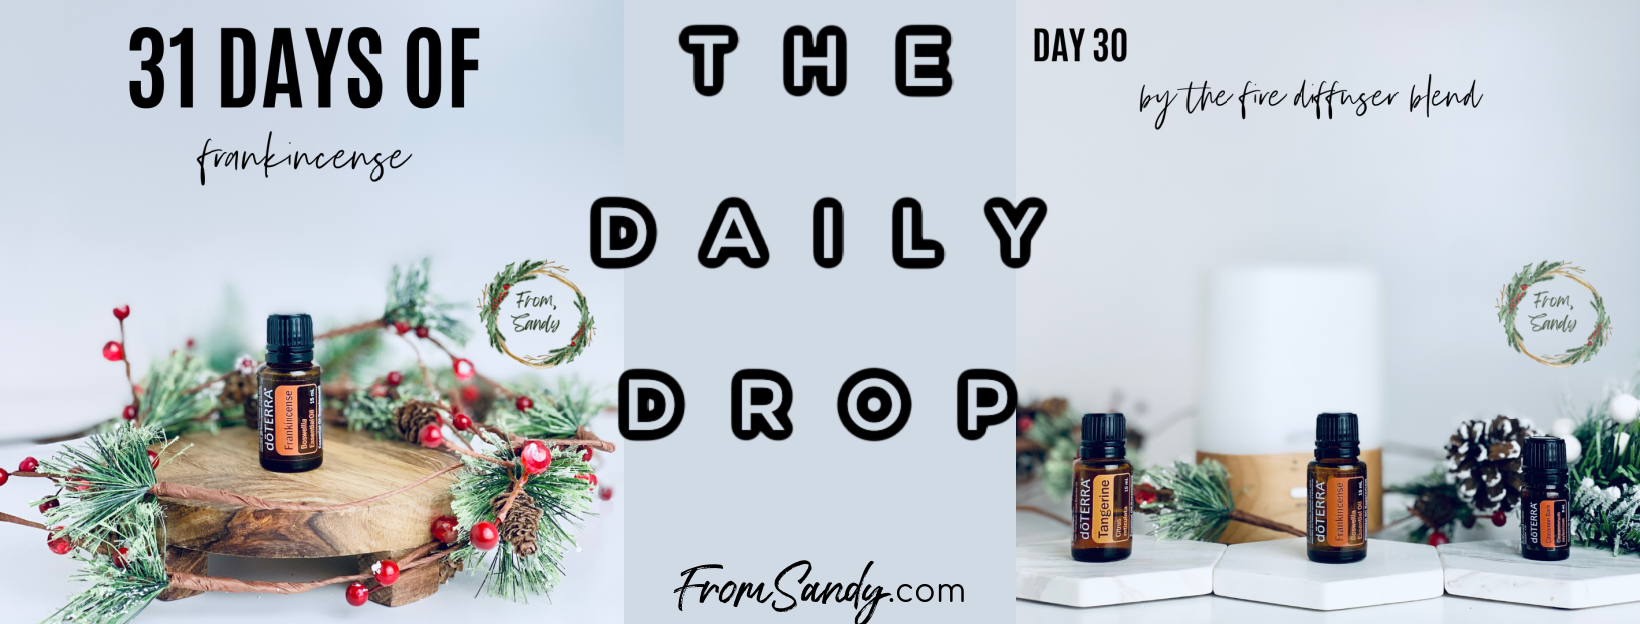 By the Fire Diffuser Blend (31 Days of Frankincense: Day 30), From Sandy